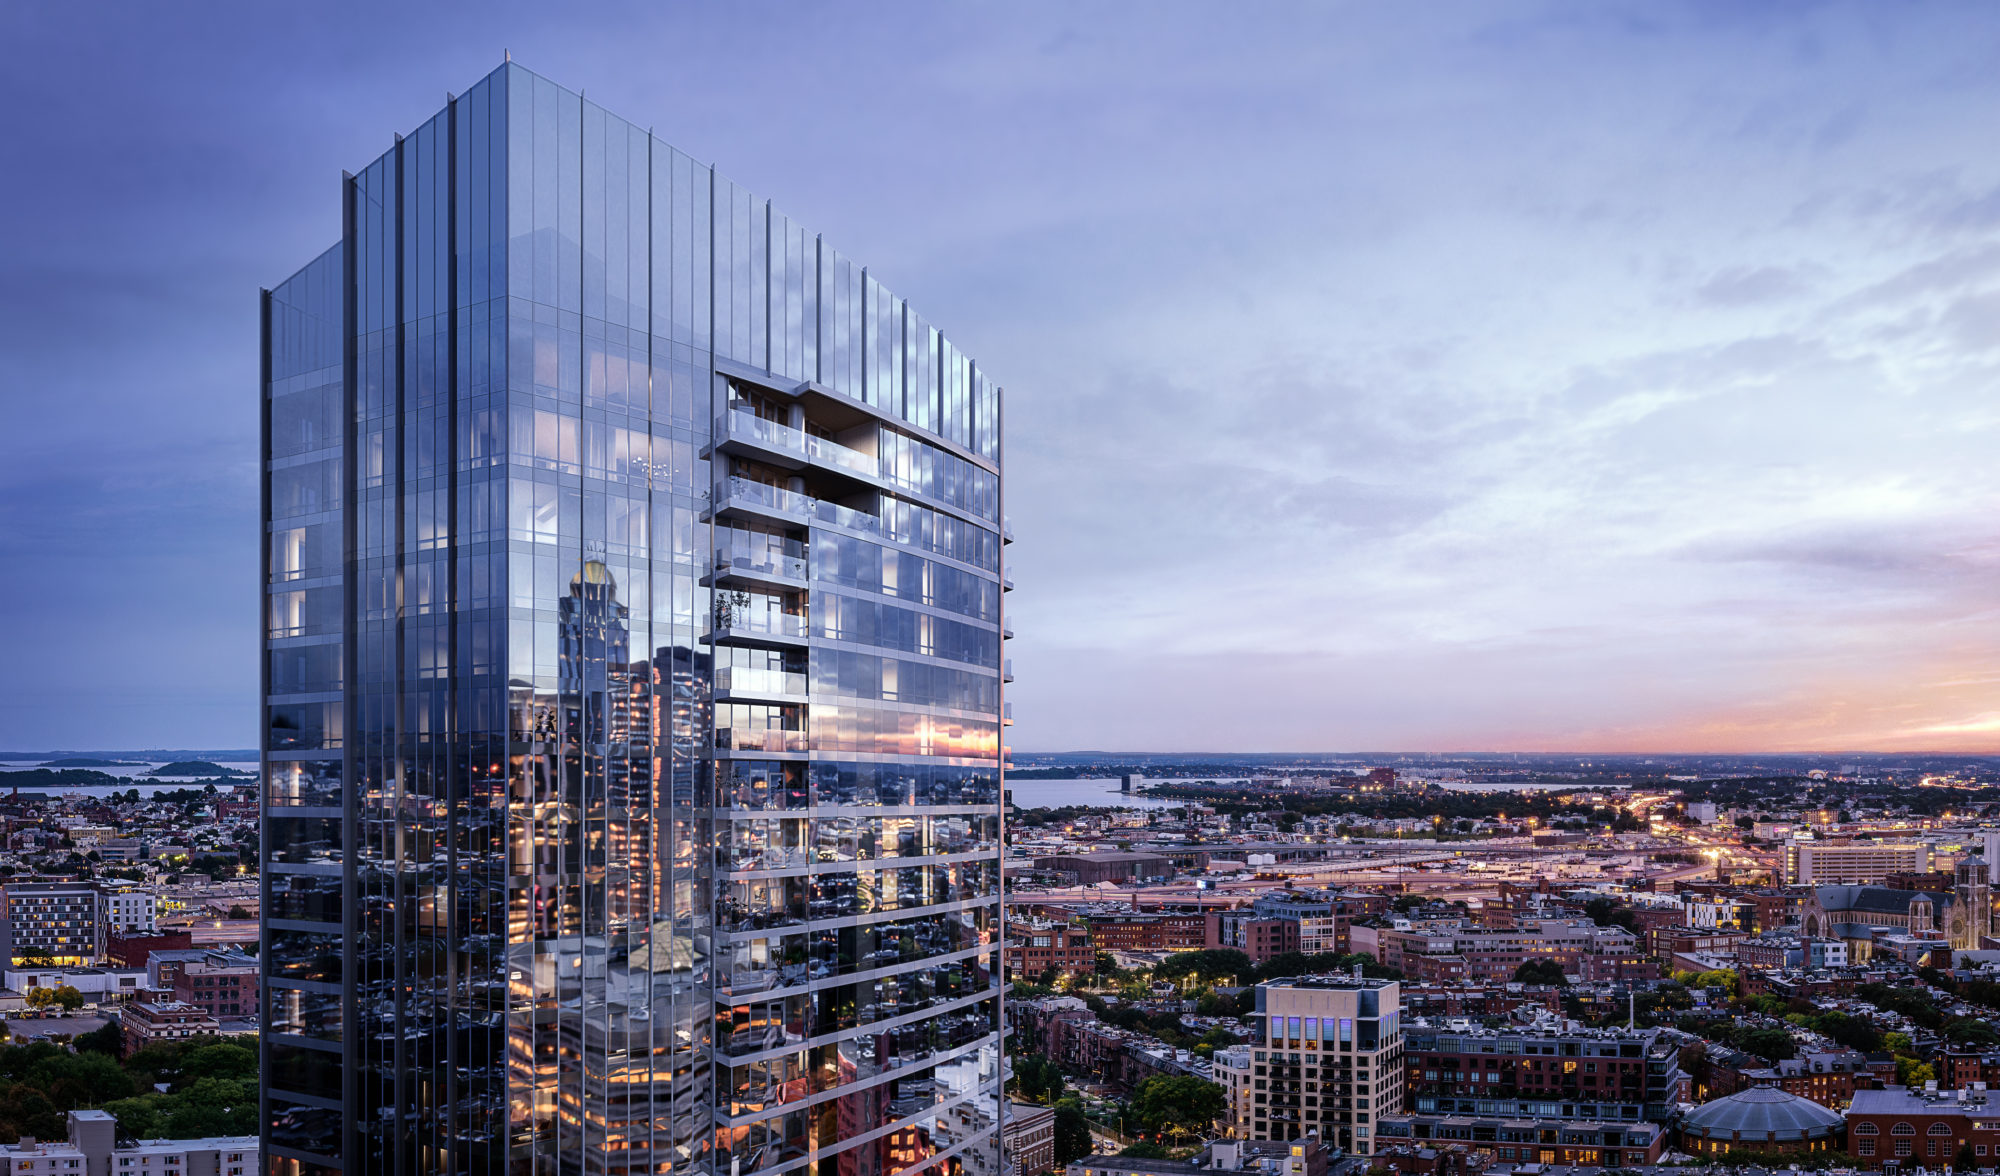 Raffles Boston Back Bay Hotel & Residences, Exterior – Rendering Credit: The Architectural Team, Inc.